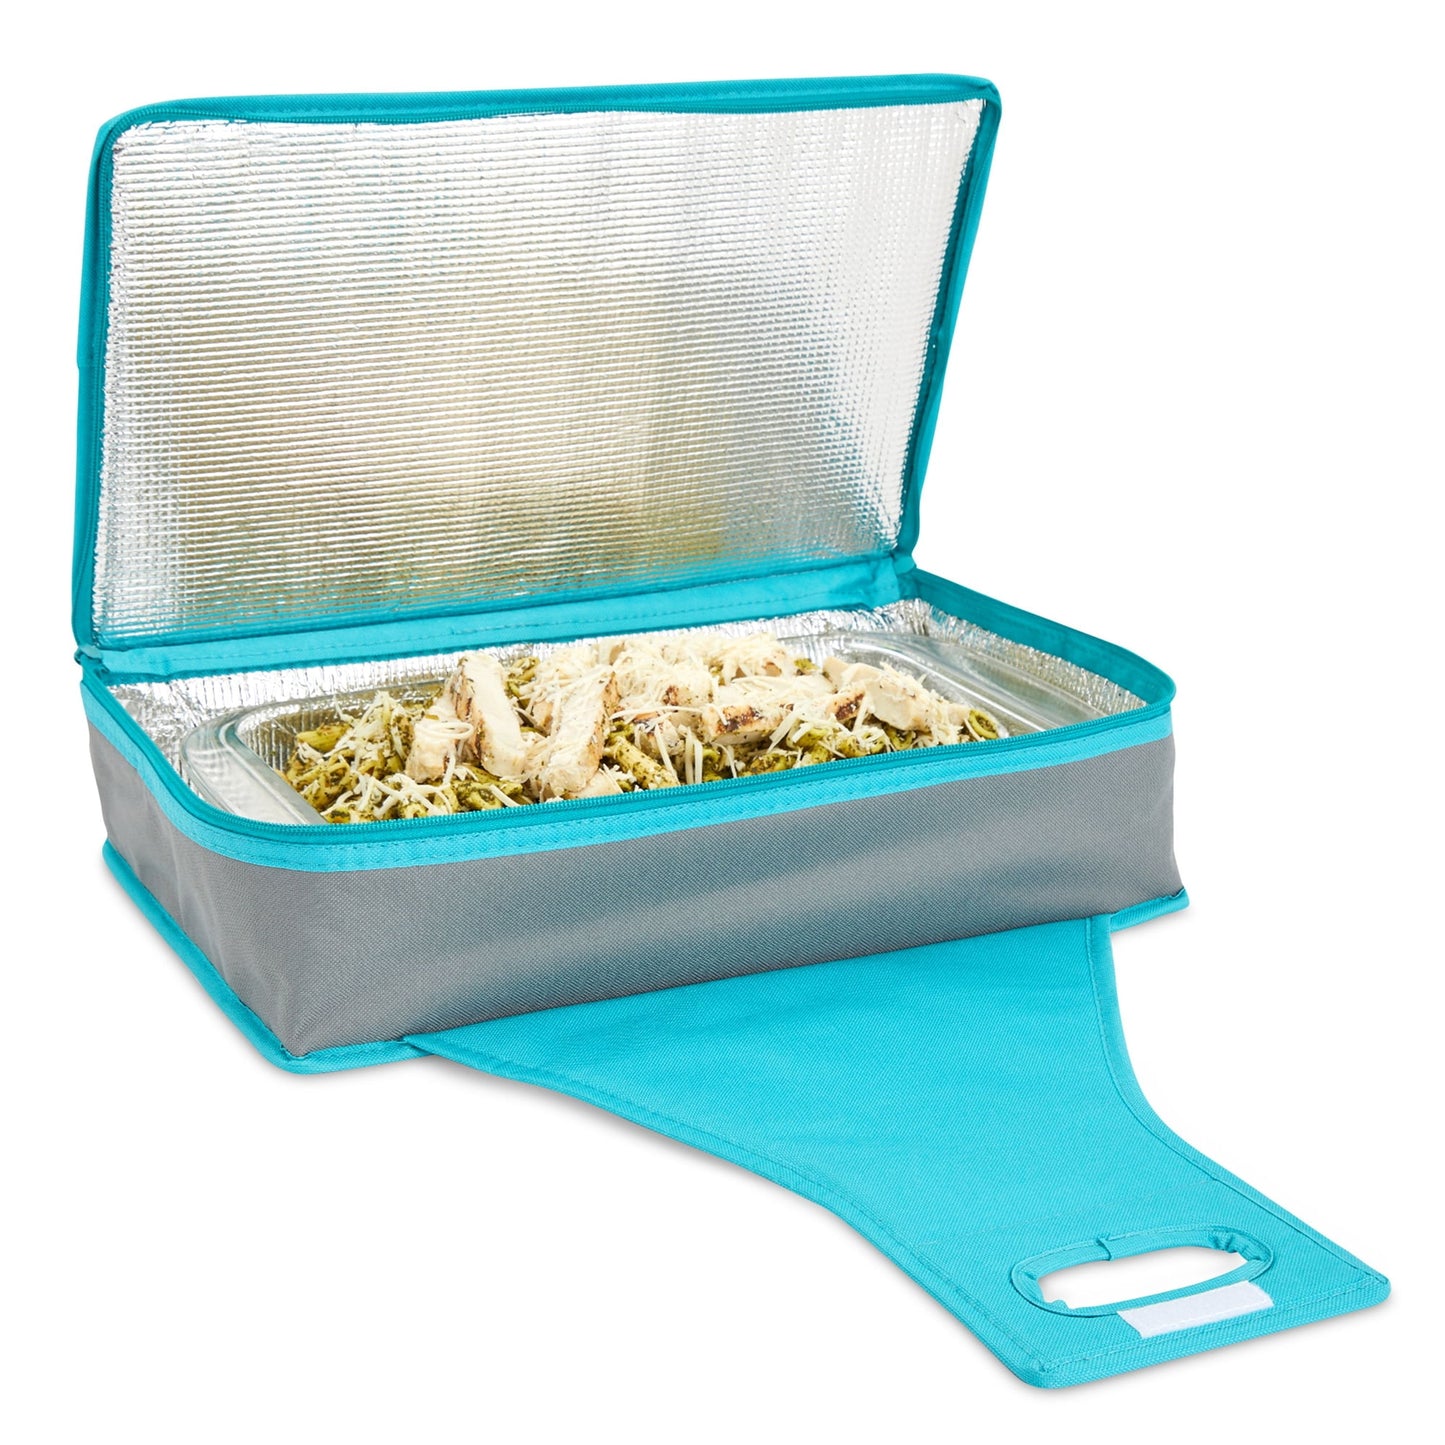 Insulated Thermal Casserole Carrier, Warmer Container to Keep Food Hot for Transport, Picnics (Teal and Gray, 16x10x4 in)